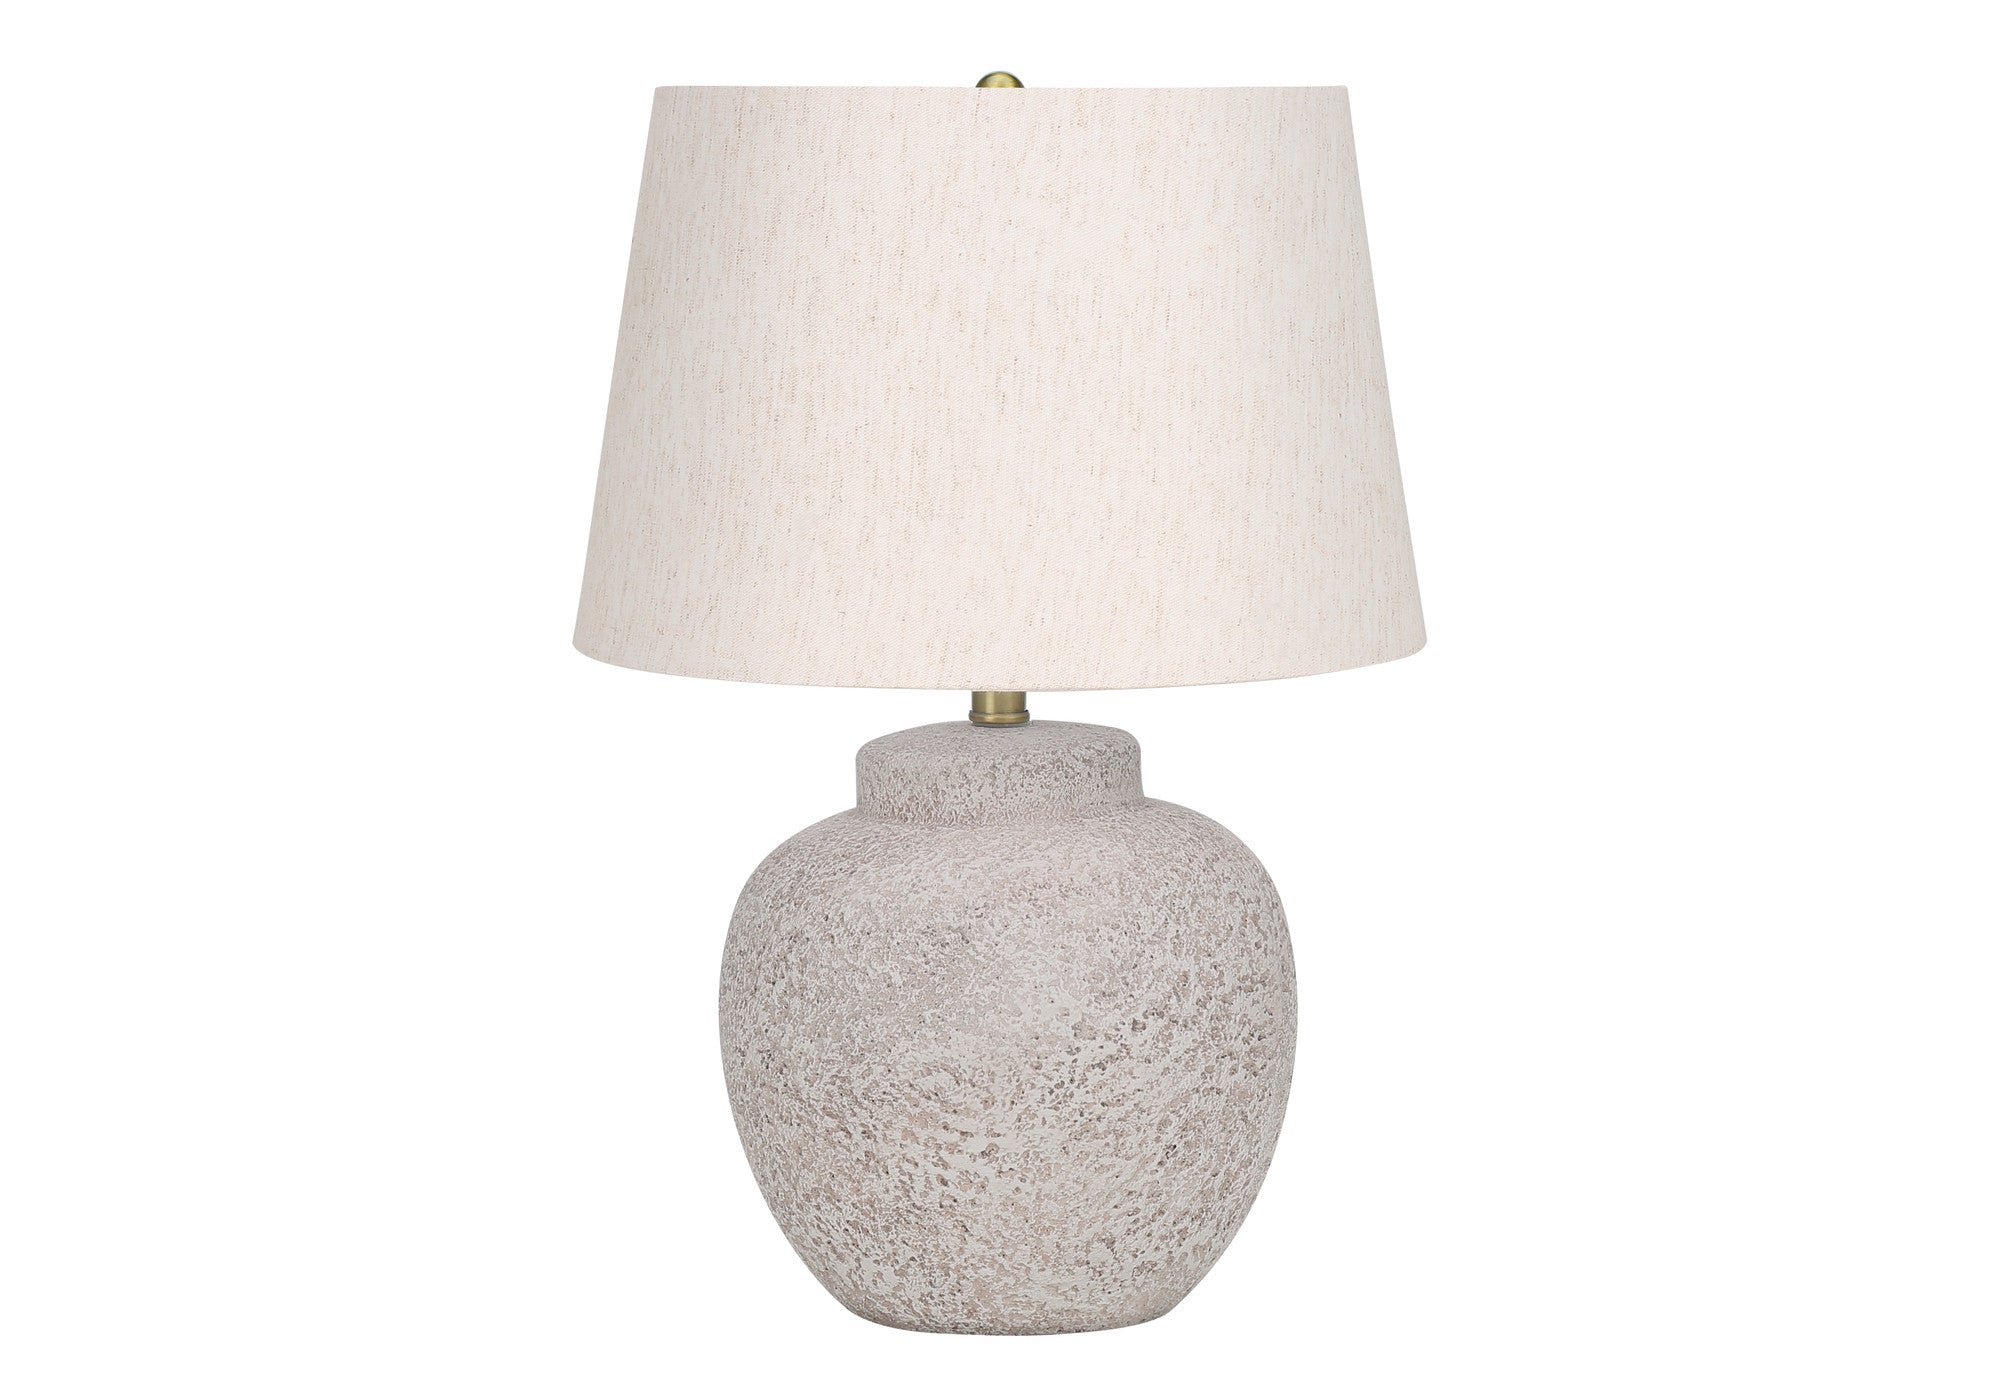 22" Cream Concrete Urn Table Lamp With Cream Abstract Empire Shade